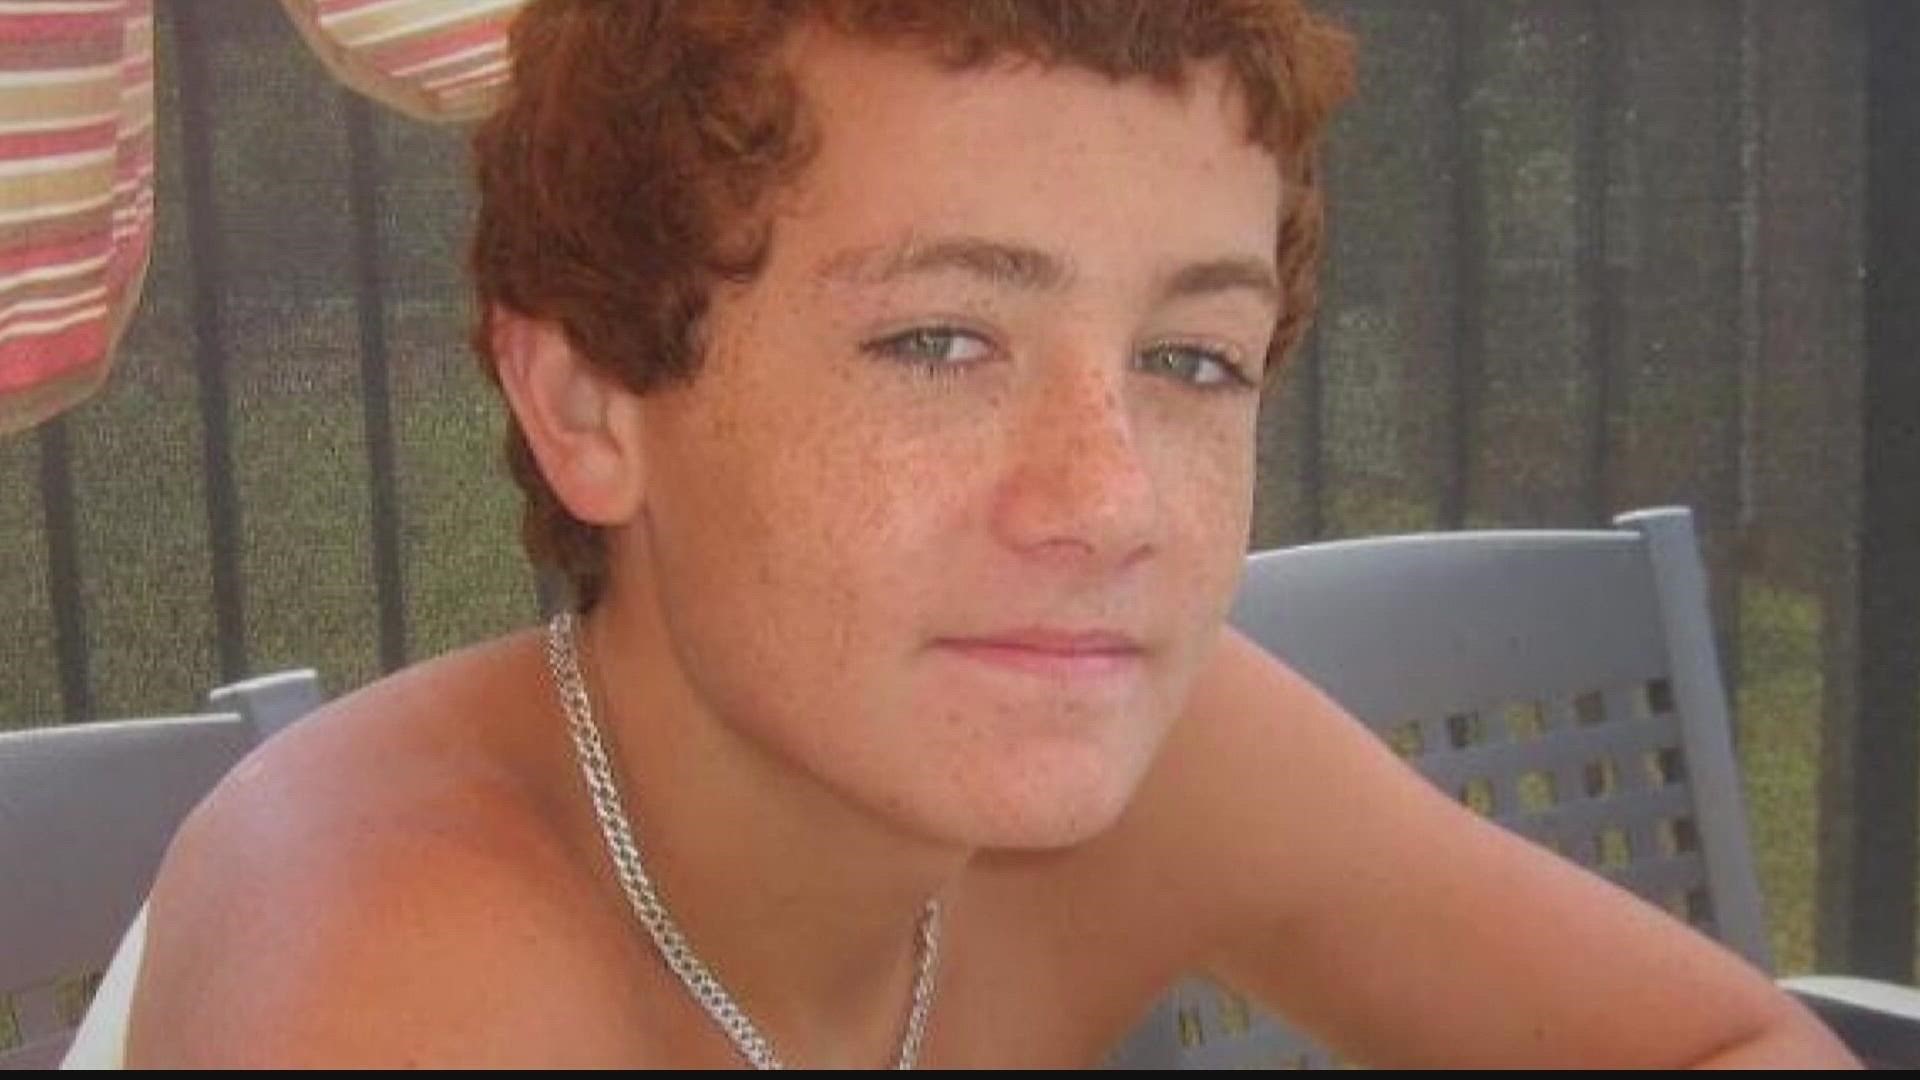 Blake Chappell, 17, vanished after his homecoming dance at East Coweta High School on Oct. 15, 2011.